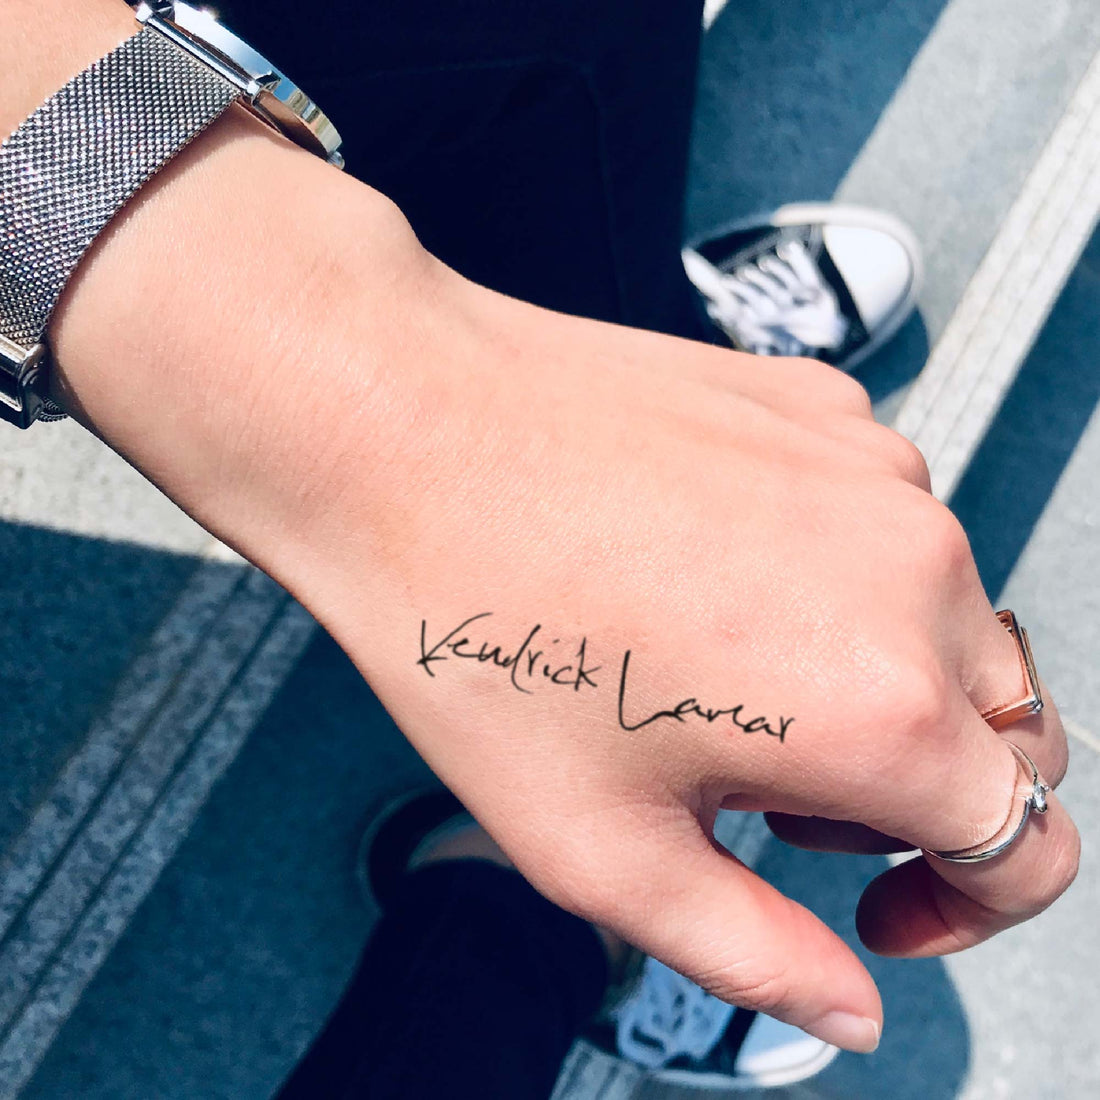 Kendrick Lamar custom temporary tattoo sticker design idea inspiration meanings removal arm wrist hand words font name signature calligraphy lyrics tour concert outfits merch accessory gift souvenir costumes wear dress up code